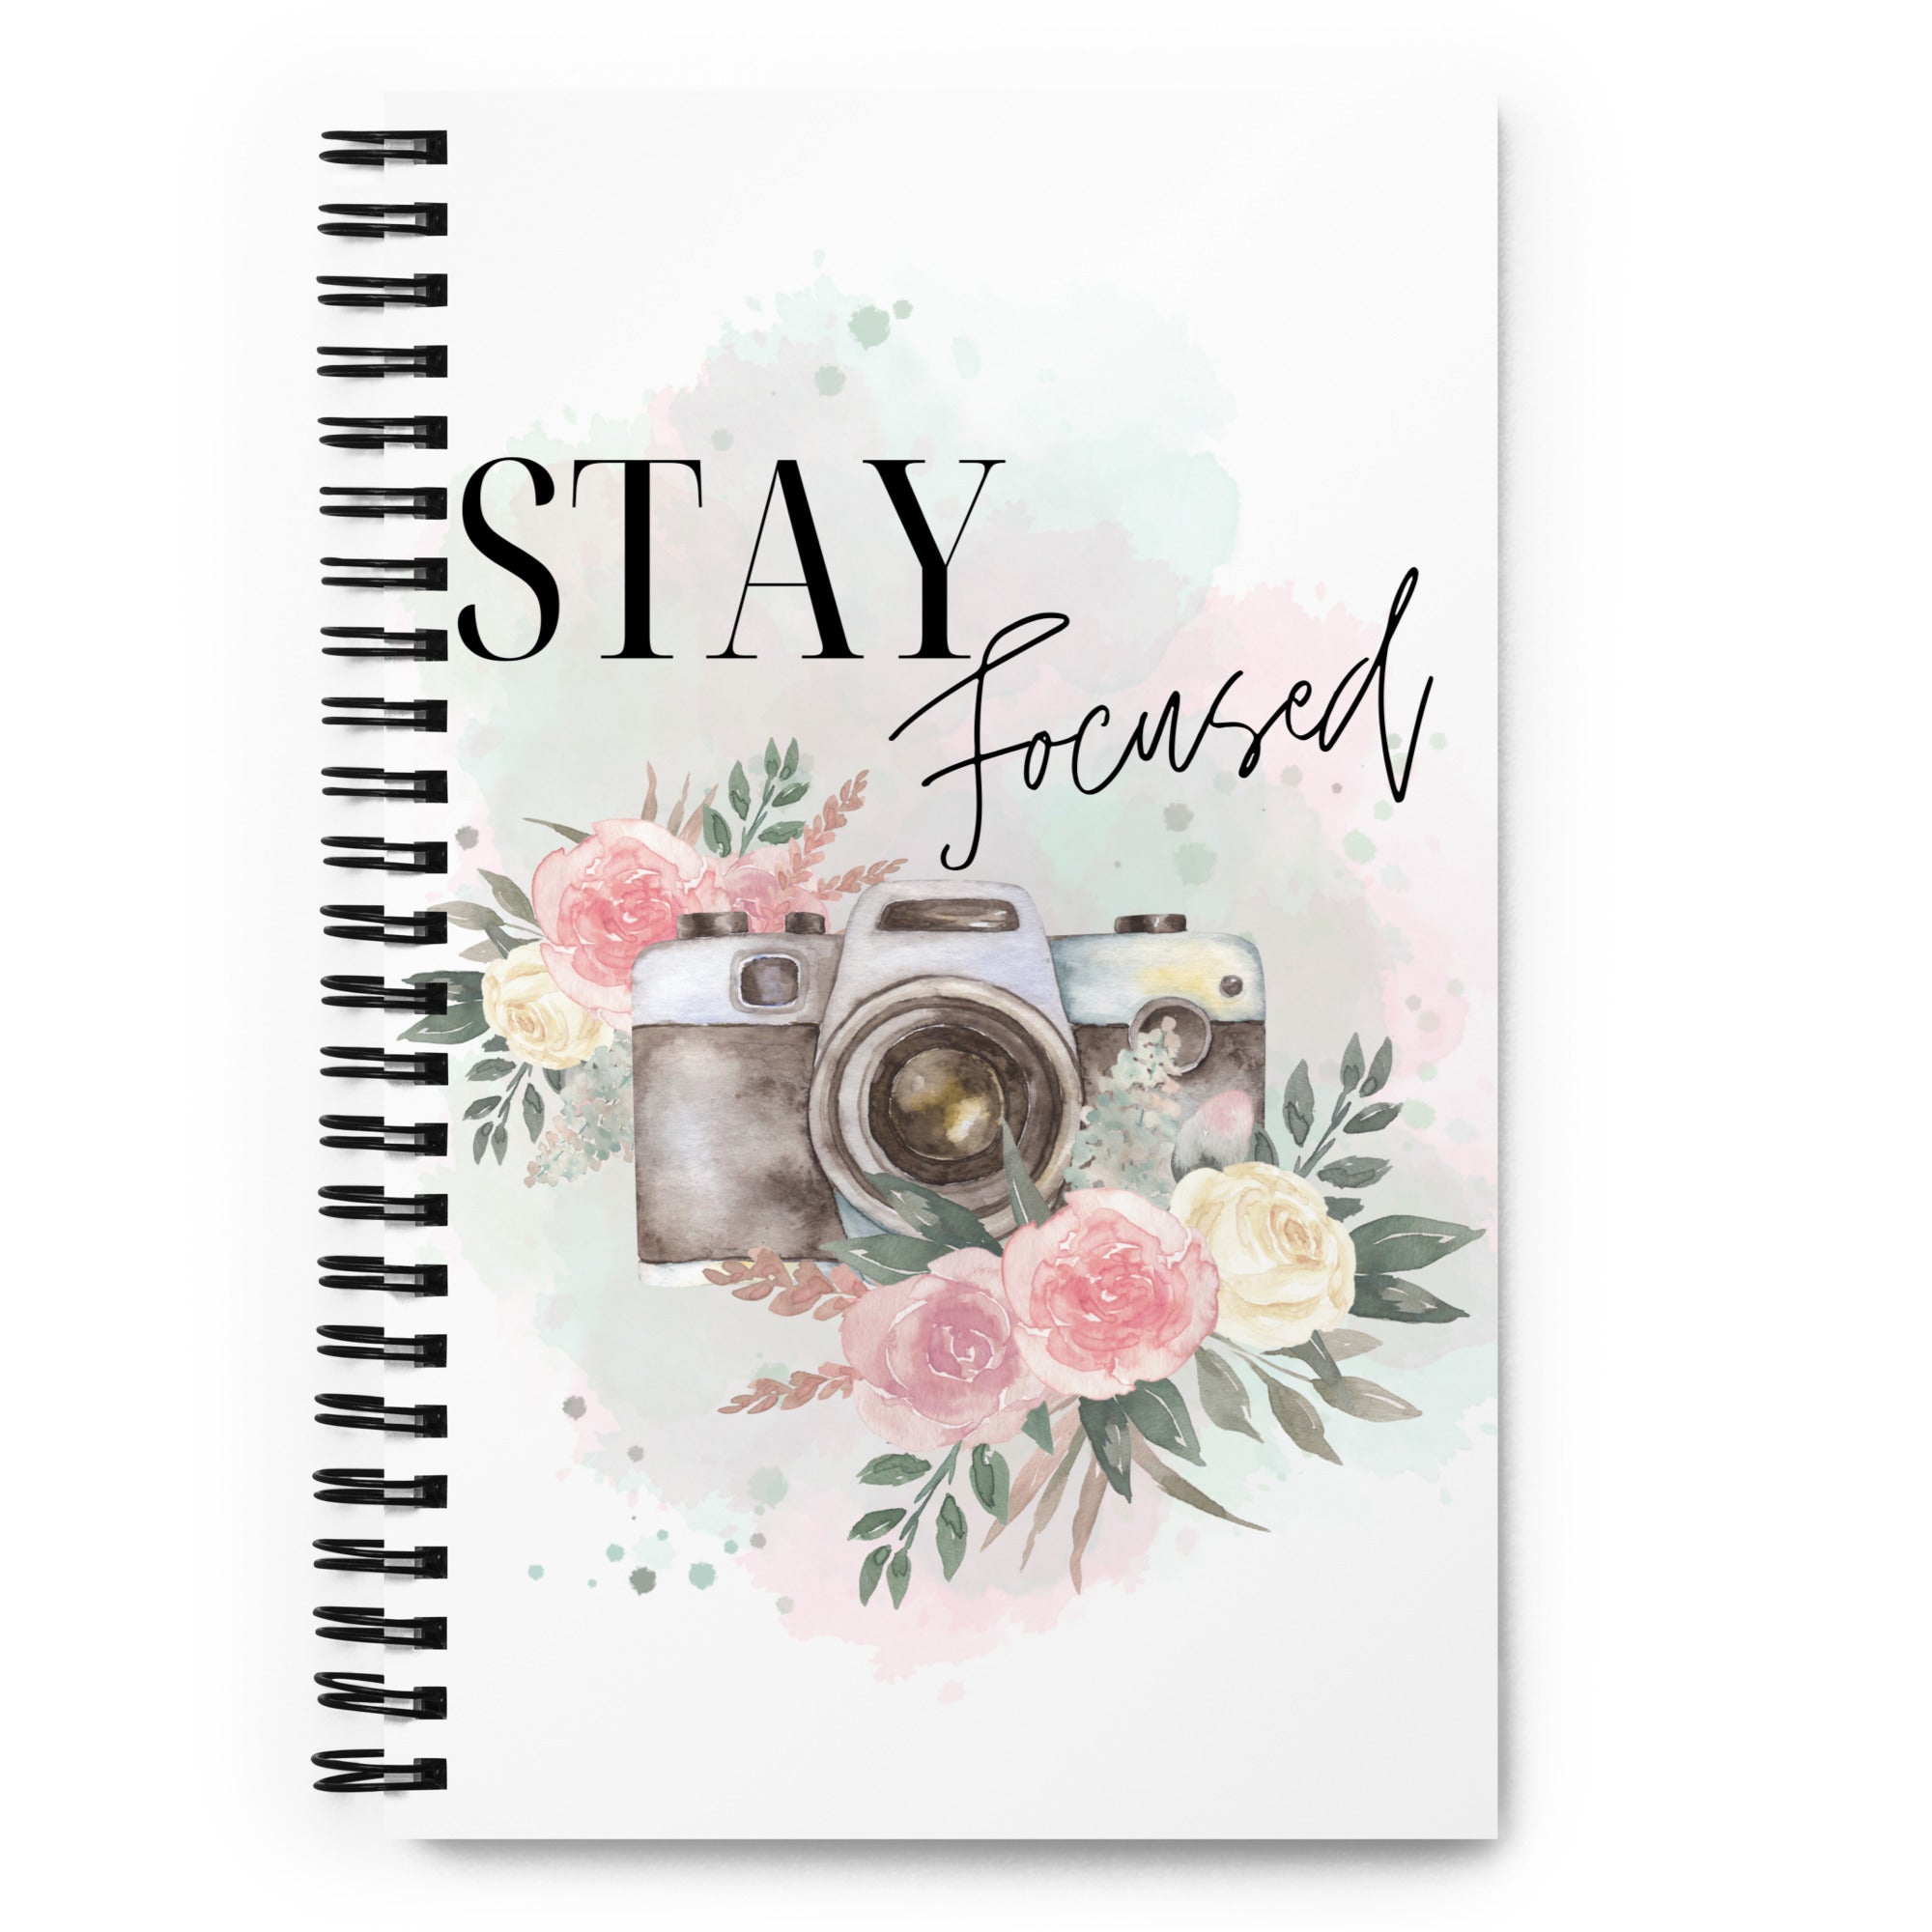 Stay Focused Photography - Spiral notebook